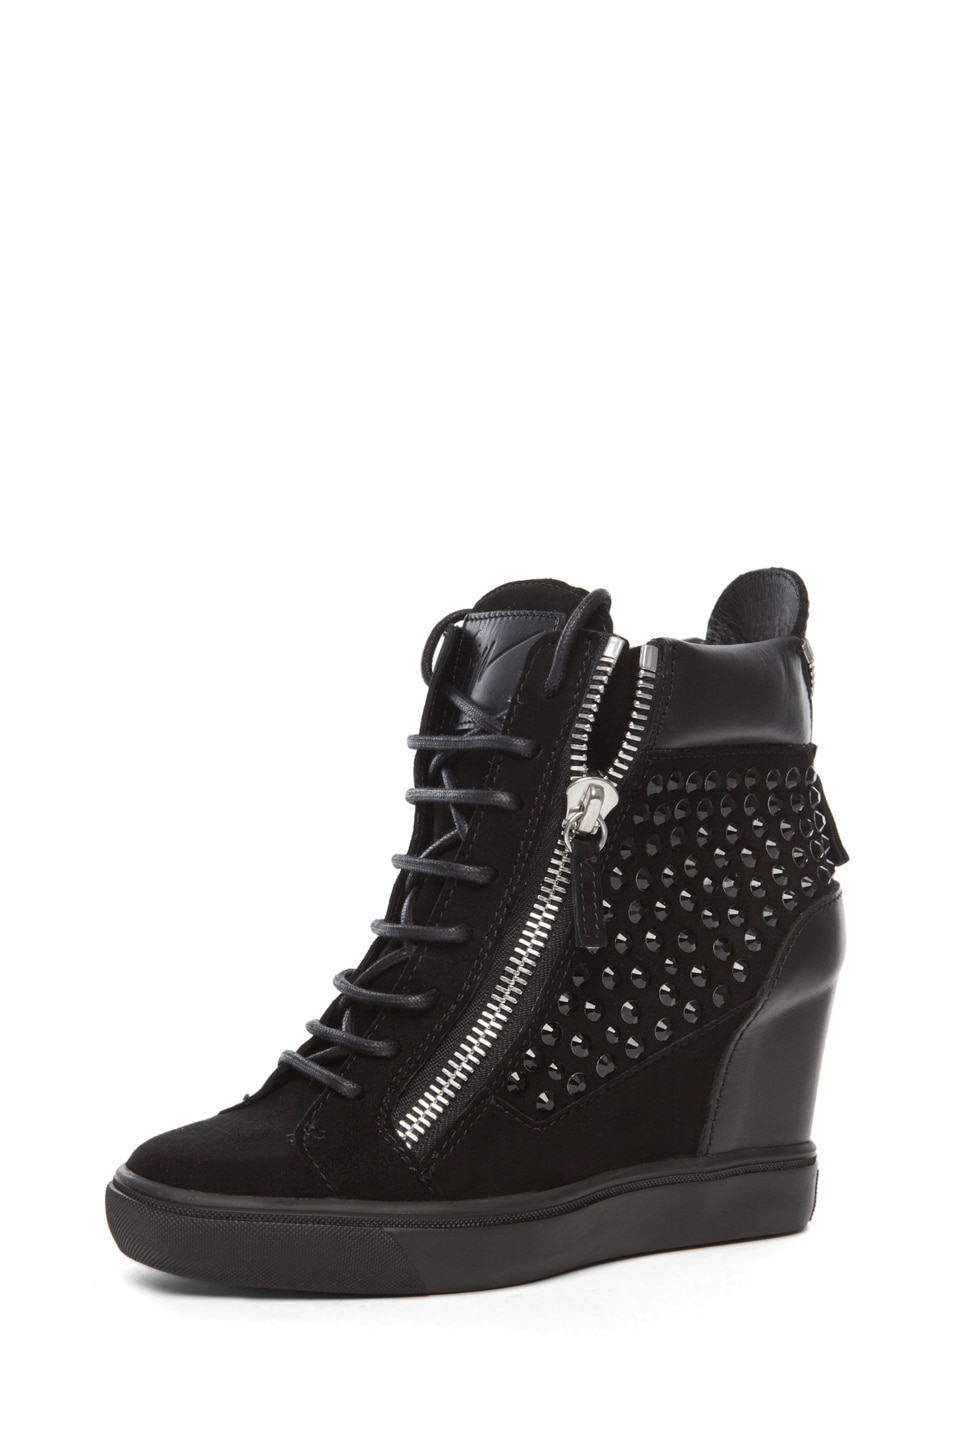 Giuseppe Zanotti Suede & Leather Embellished Wedge Sneakers in Black | FWRD